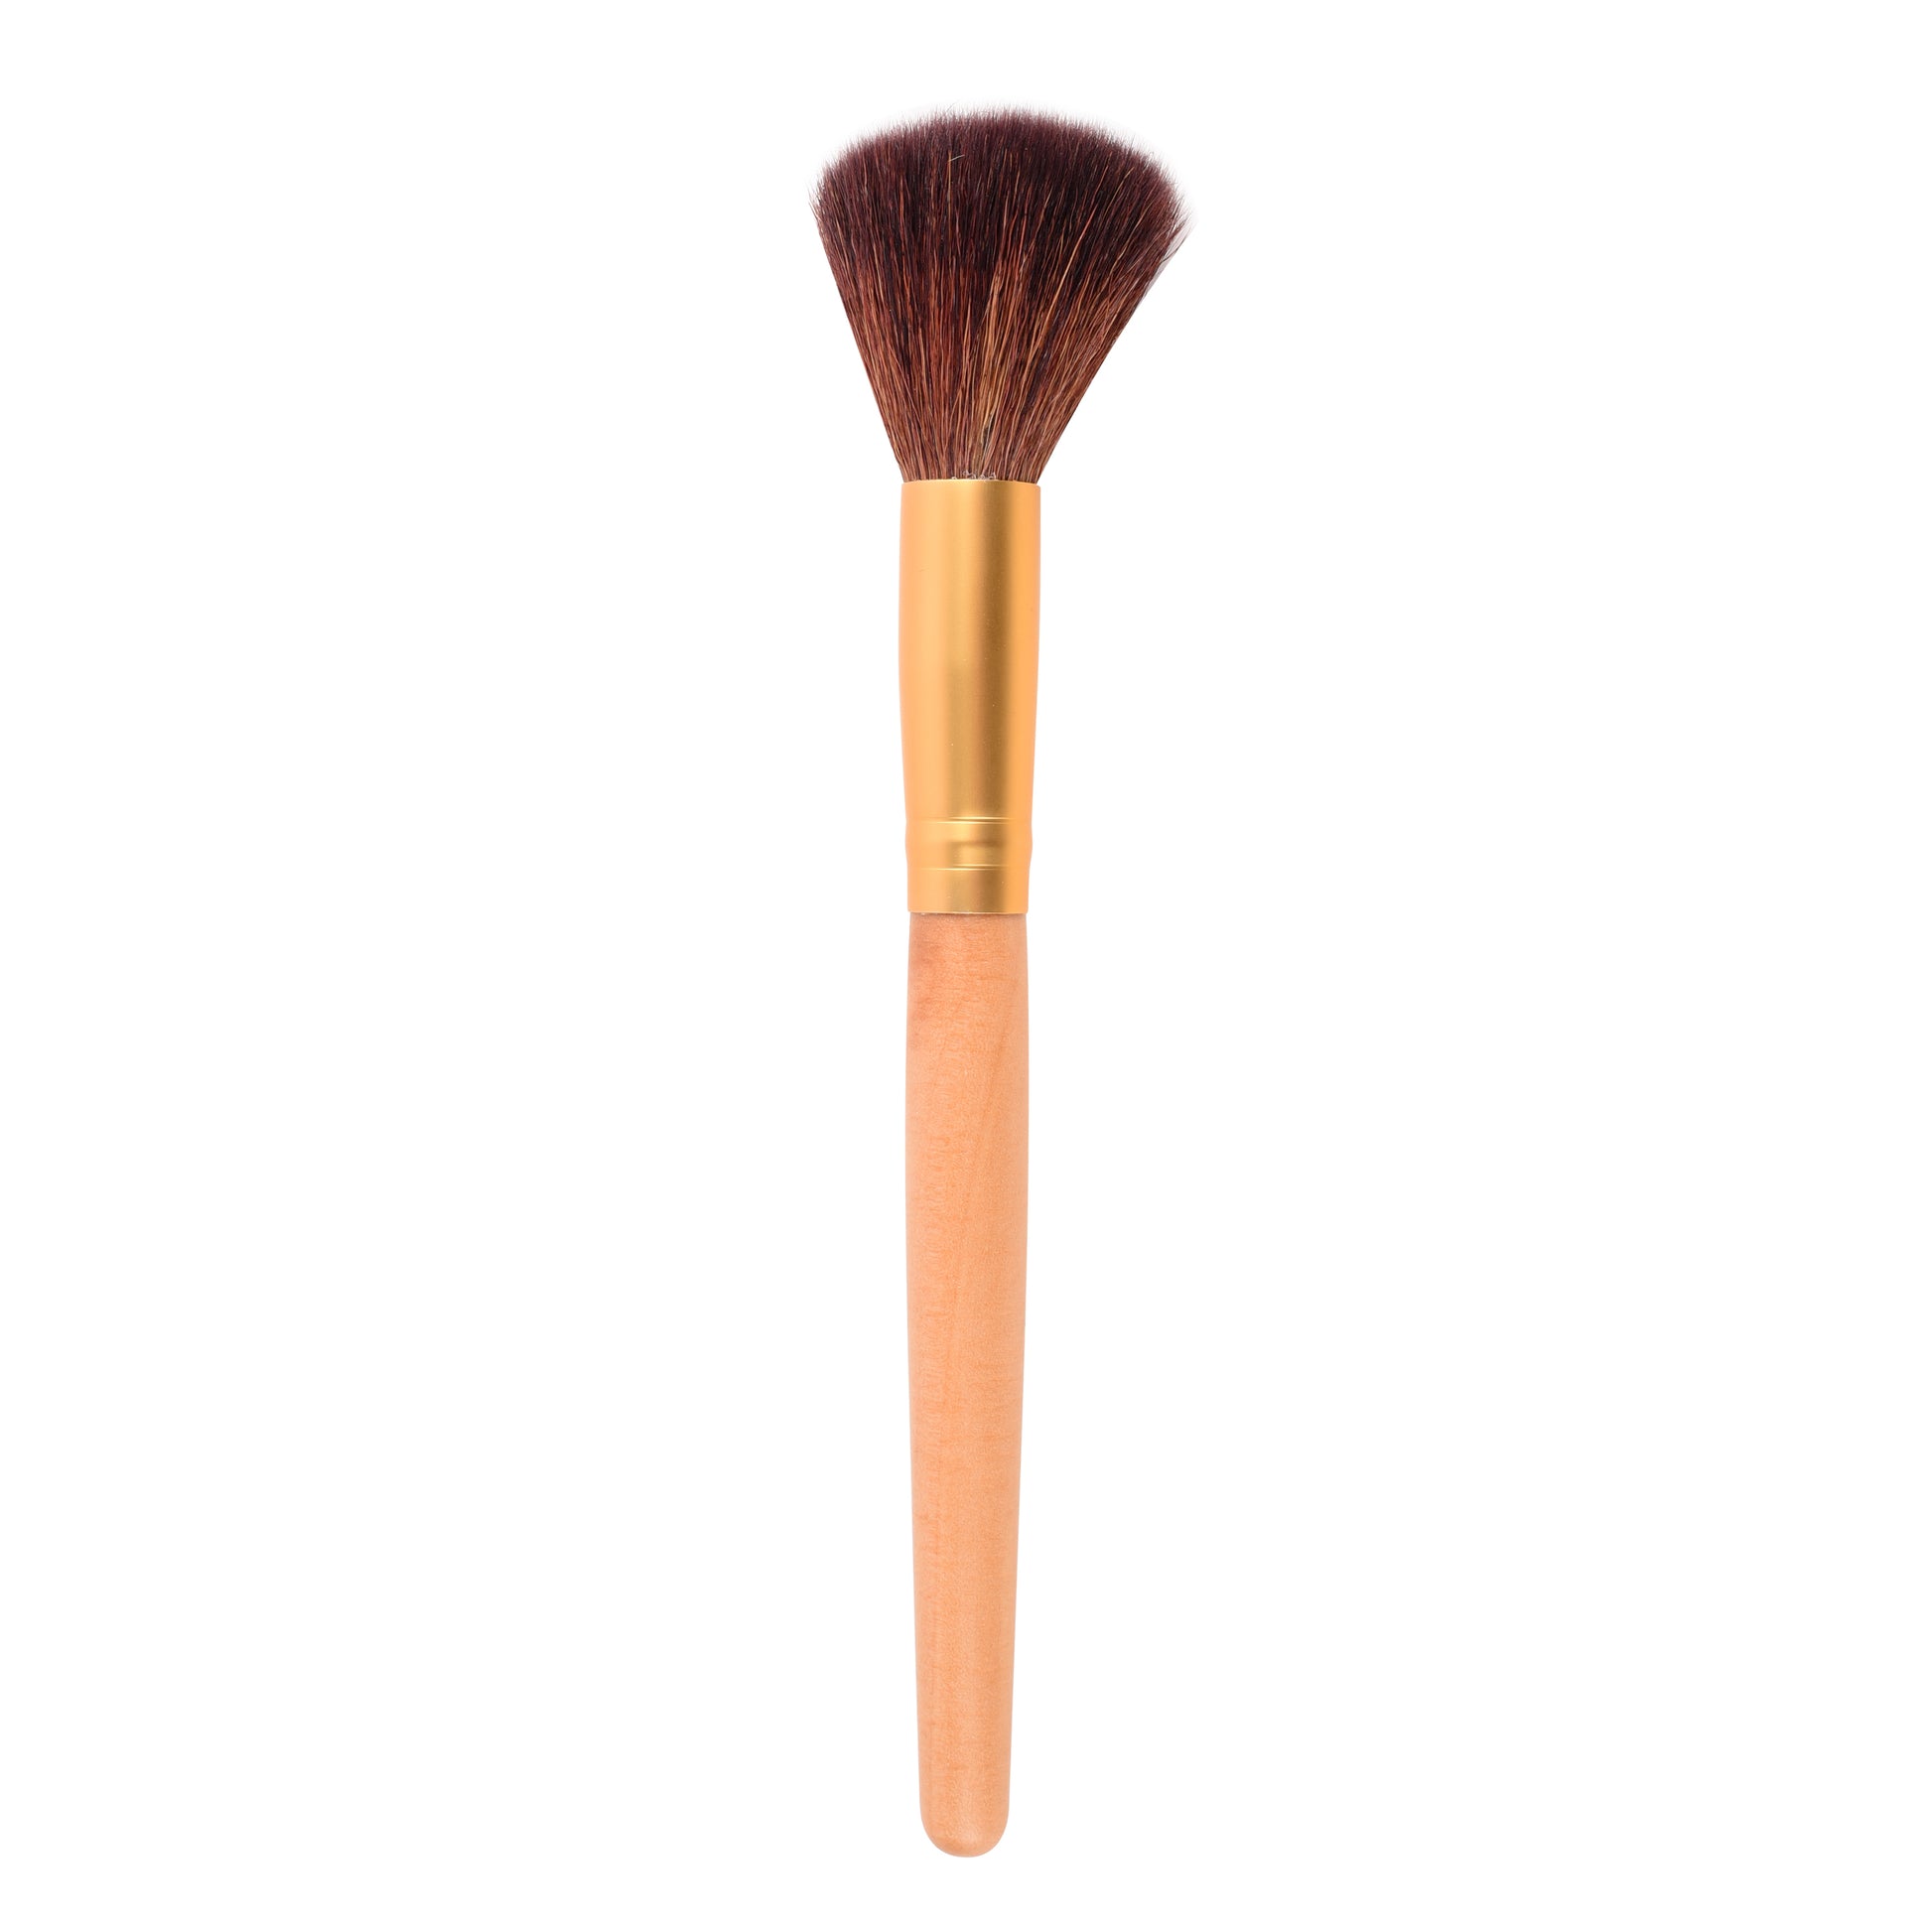 Enhance your makeup routine with our Fine Domed-Shaped Natural Fiber Blusher Brush. Designed for perfect application, this professional brush effortlessly blends blush for a natural, seamless finish. Ideal for both everyday and professional use.